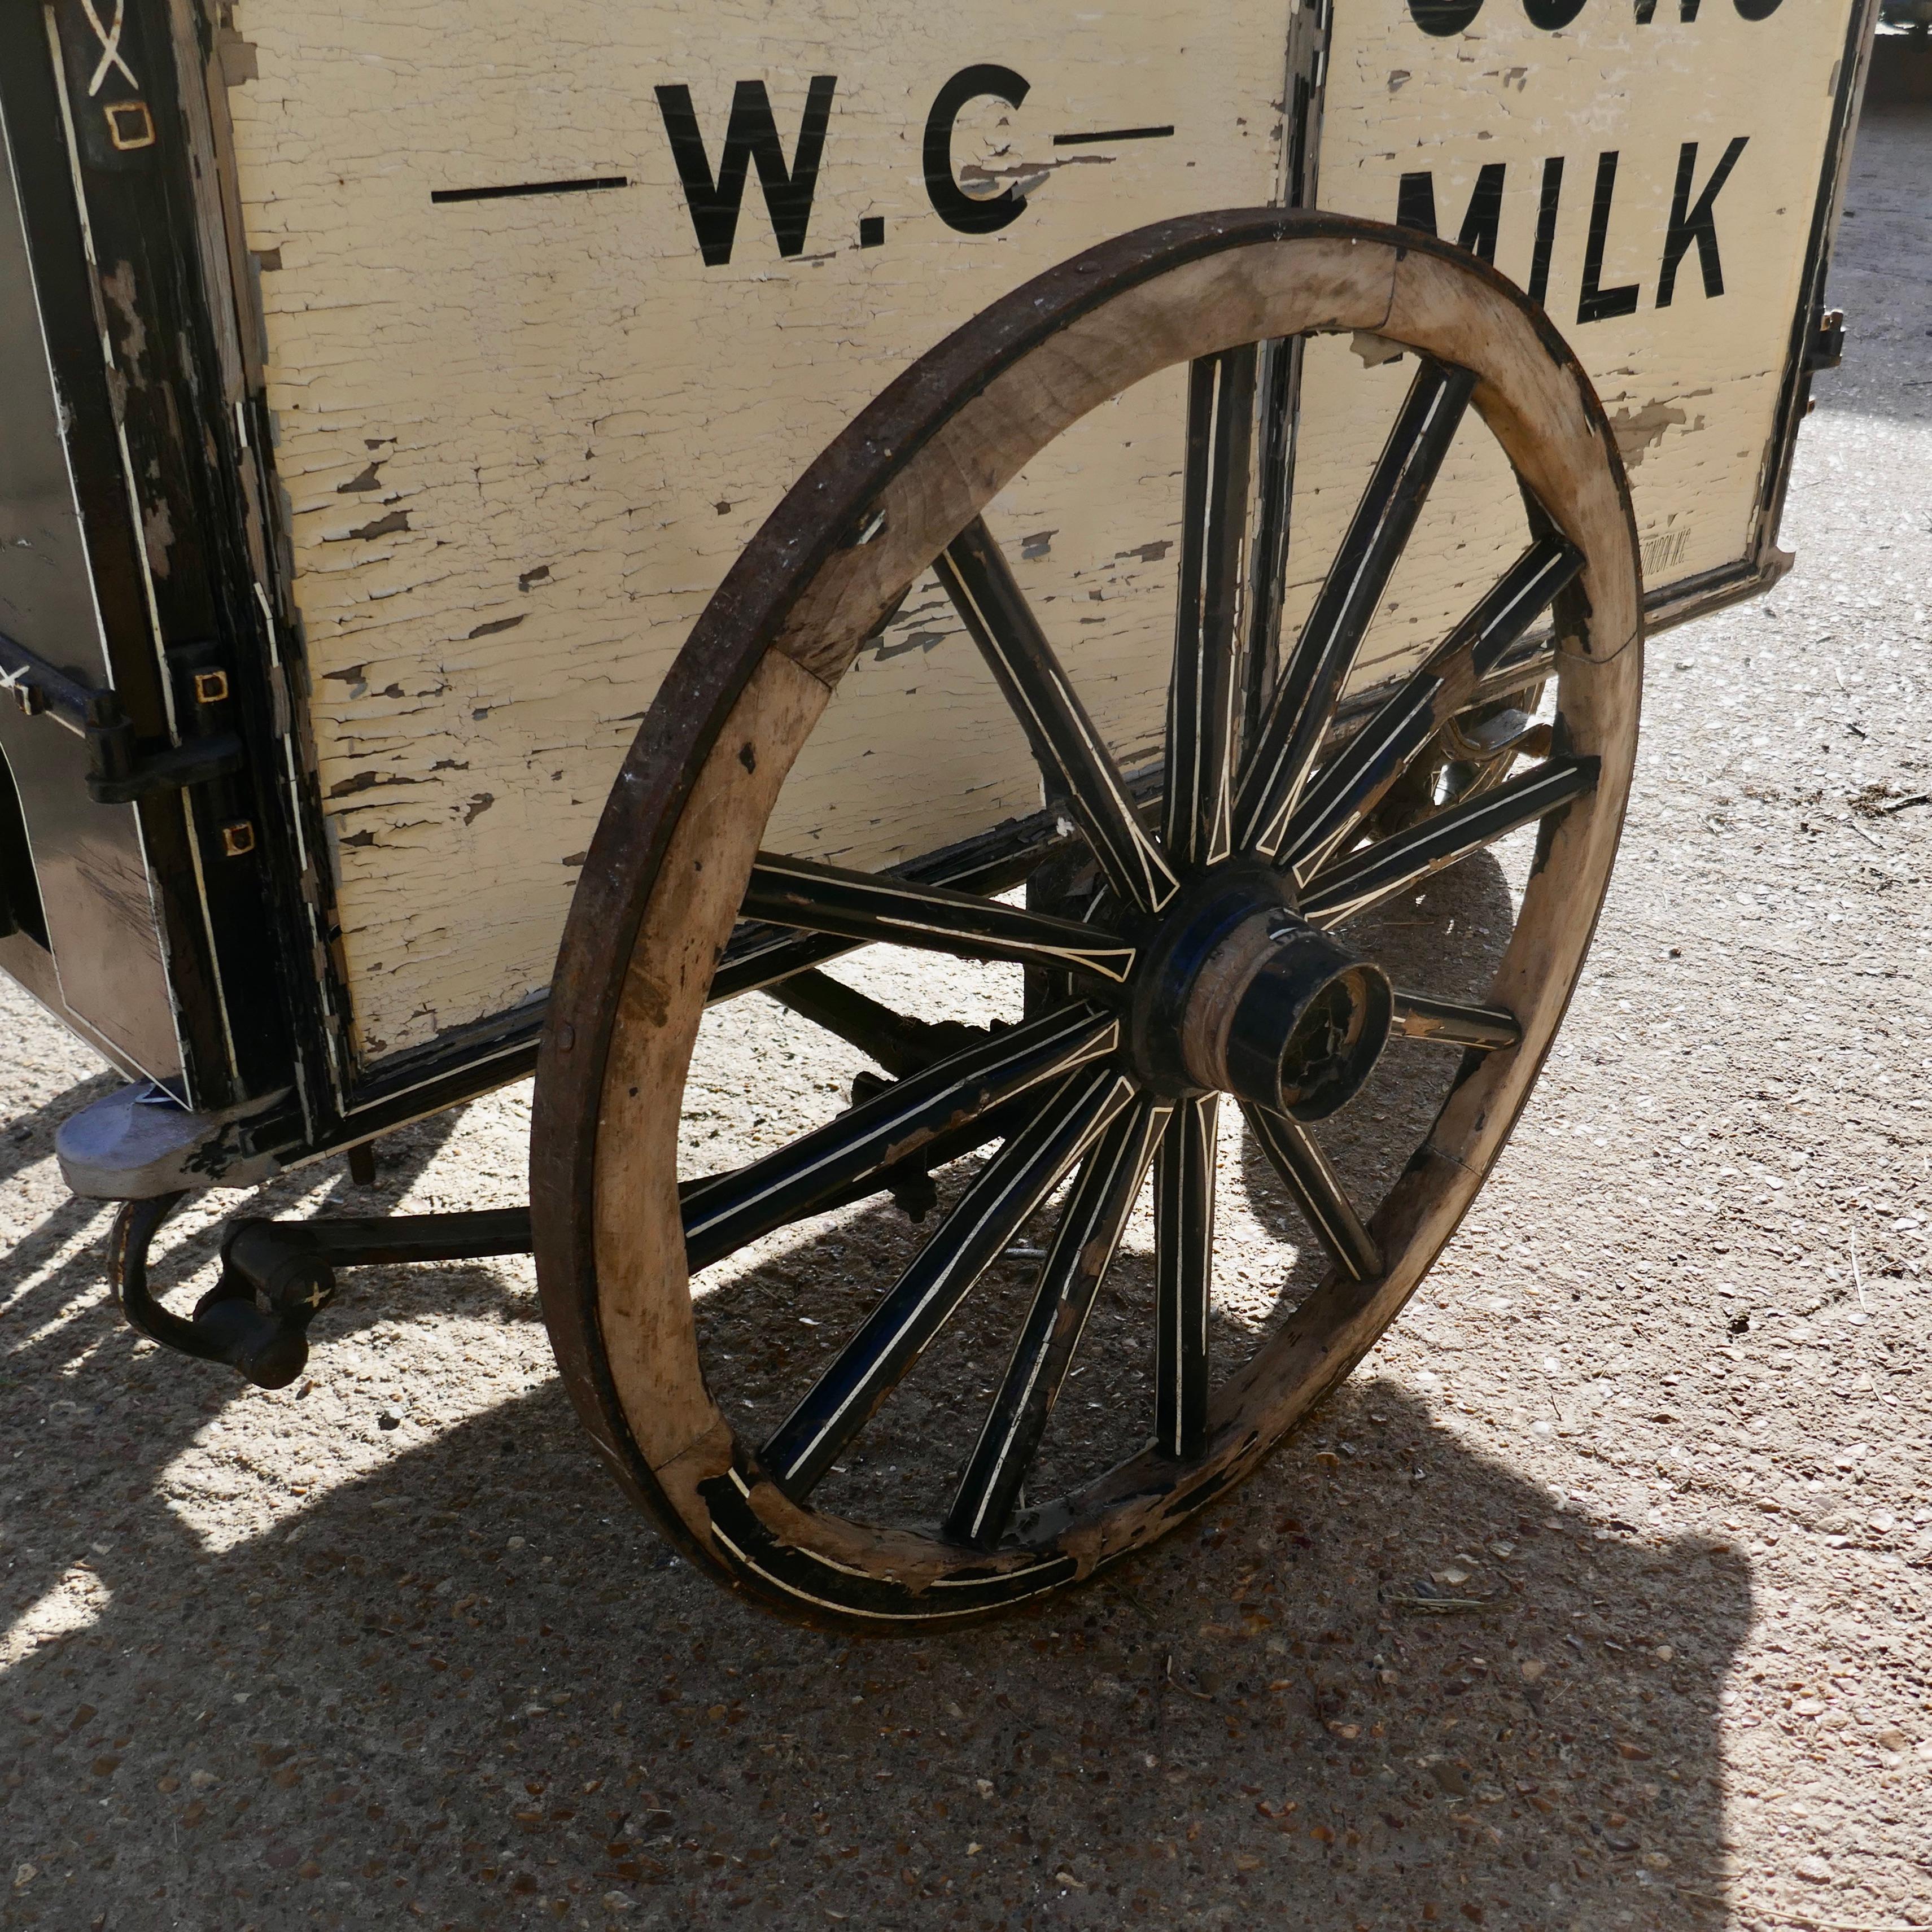 Edwardian express dairy delivery milk cart

This is a very rare survivor of early London door step milk deliveries, the top section holds crates and glass milk bottles, there are a few replacements here and they have been painted to look as though